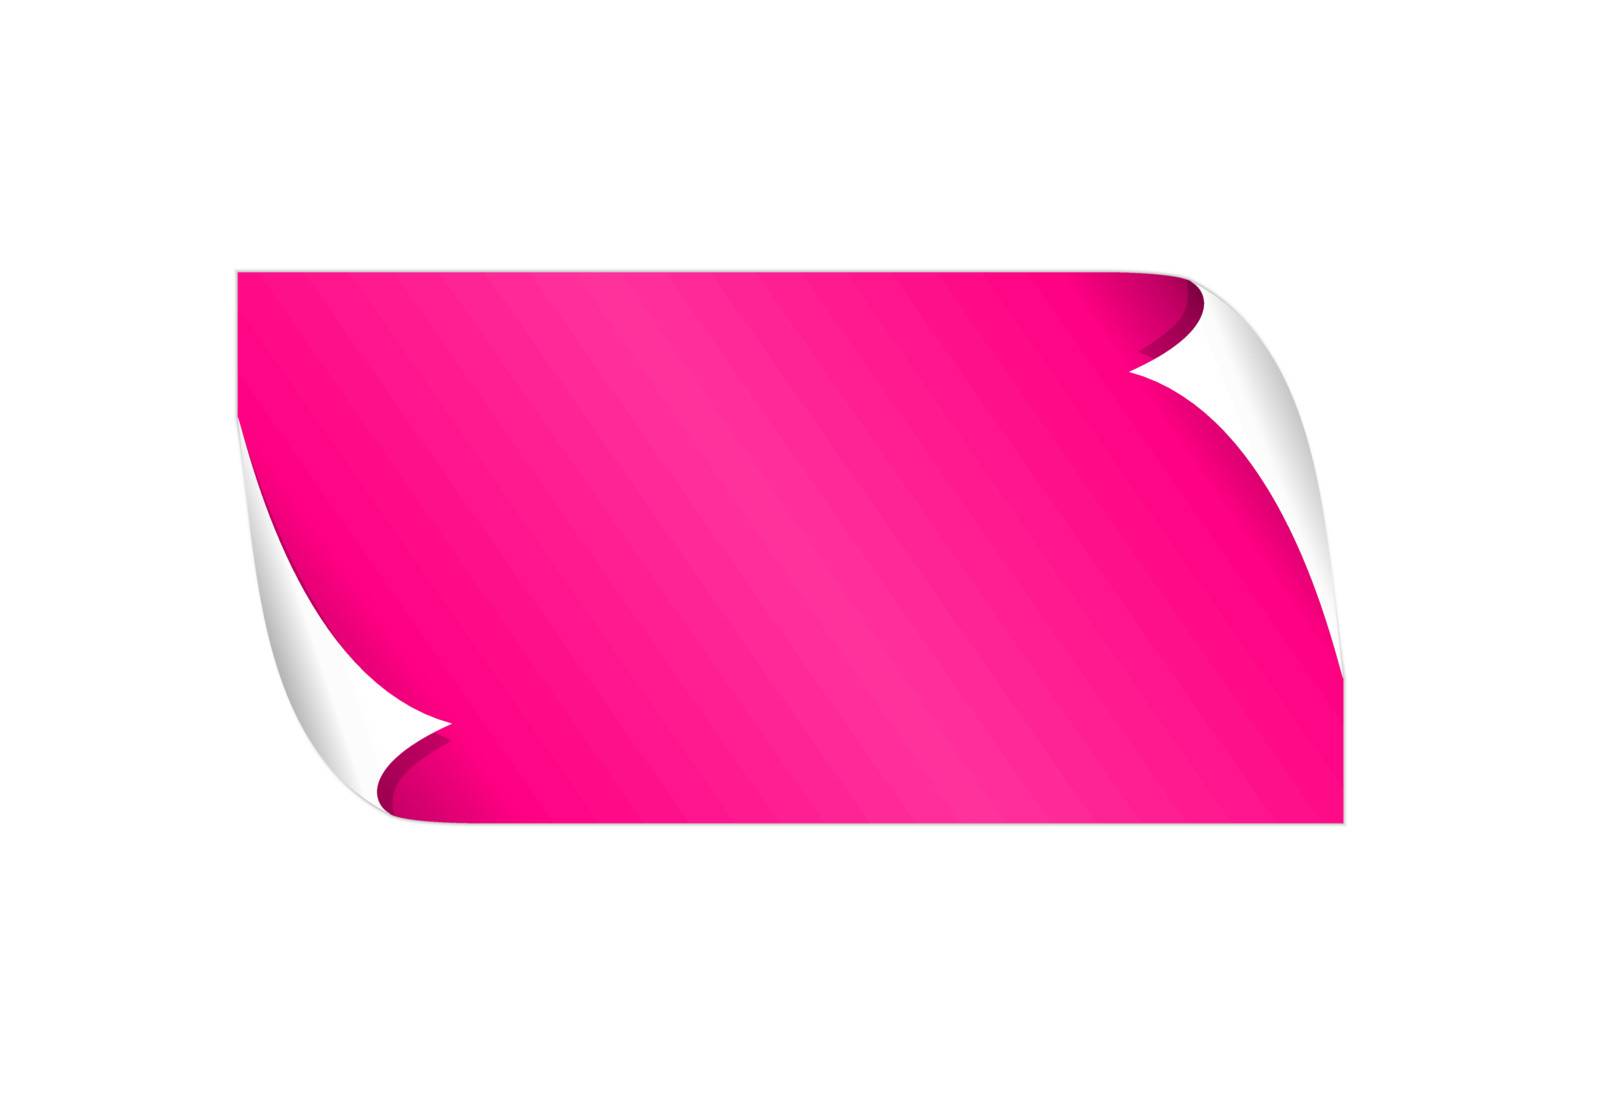 The pink rectangle label with bent corner